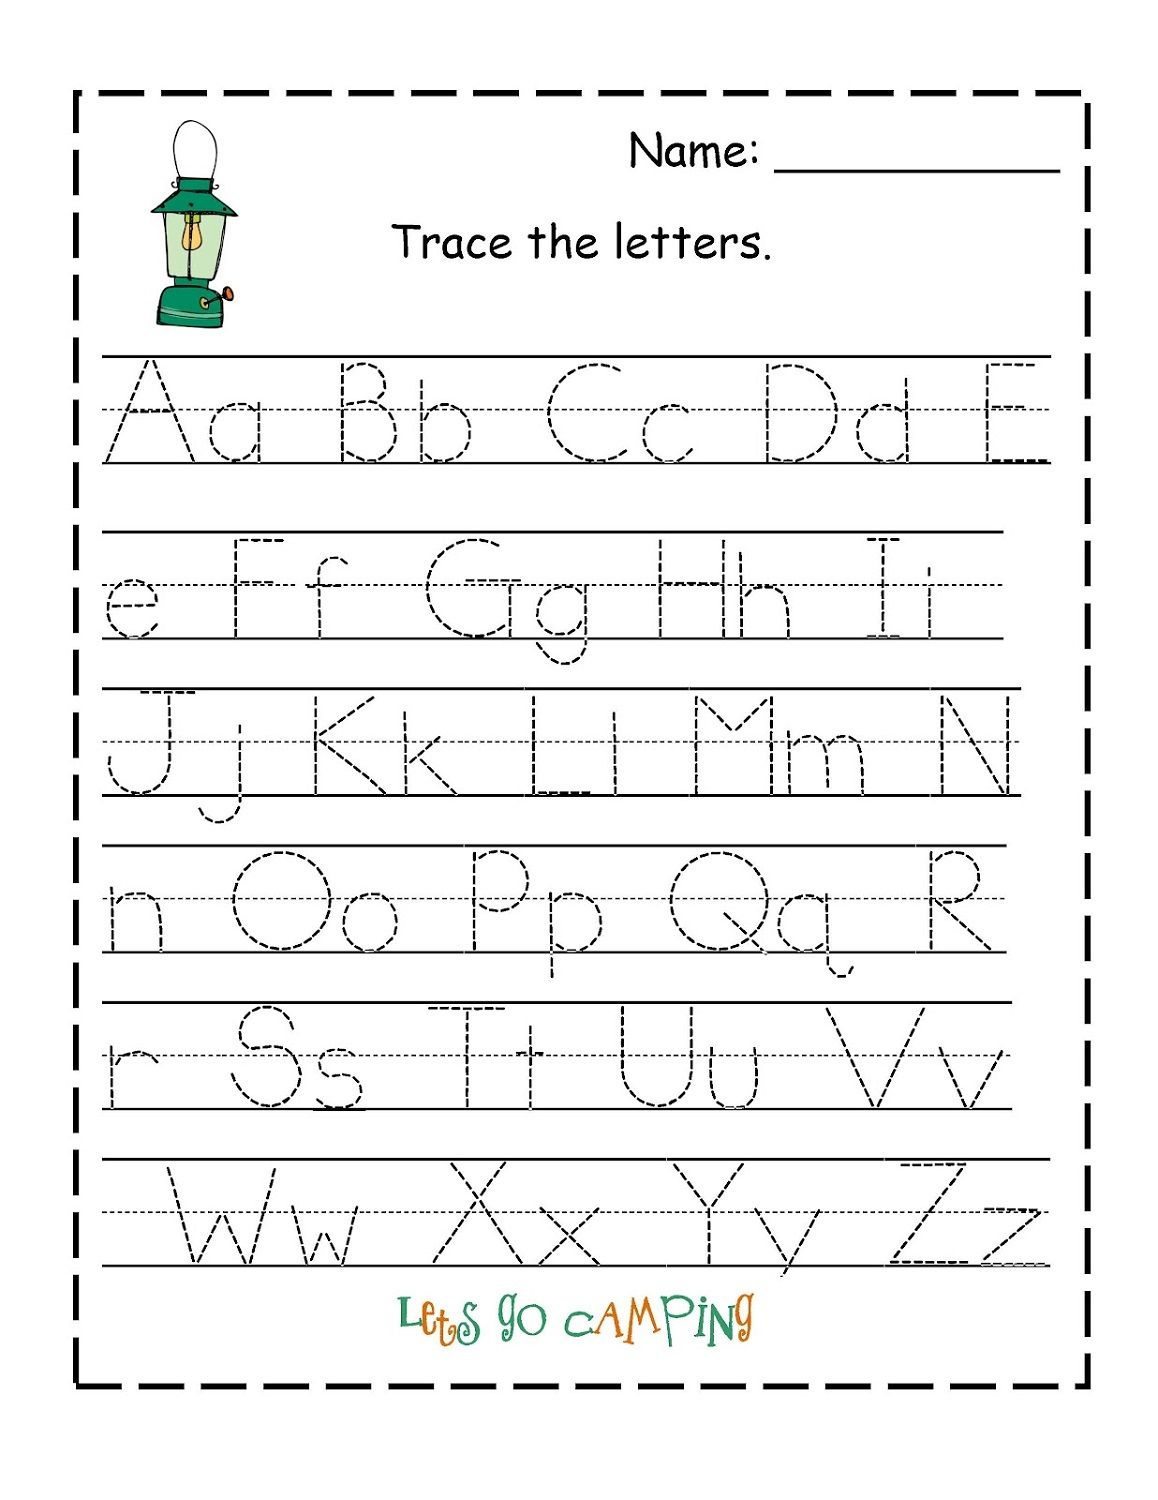 Traceable Alphabet Worksheets A-Z | Alphabet Tracing intended for A-Z Name Tracing